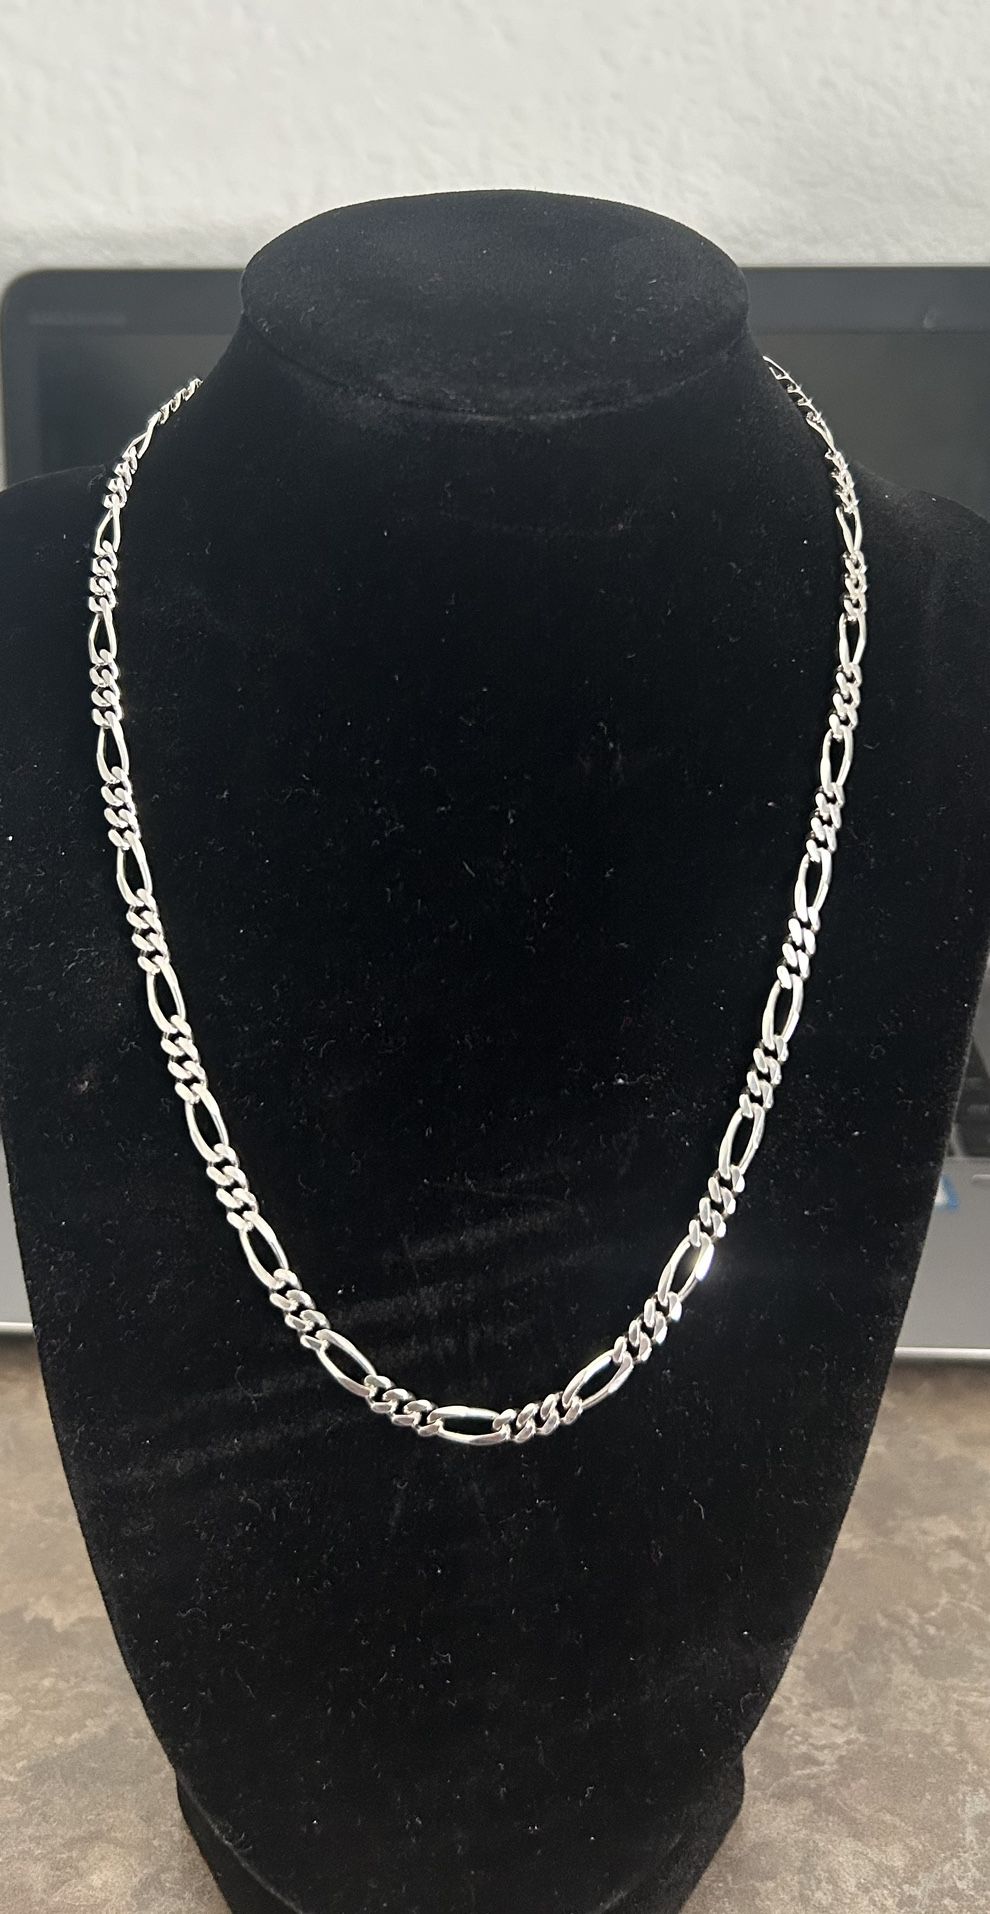 925 Sterling Silver Necklace 